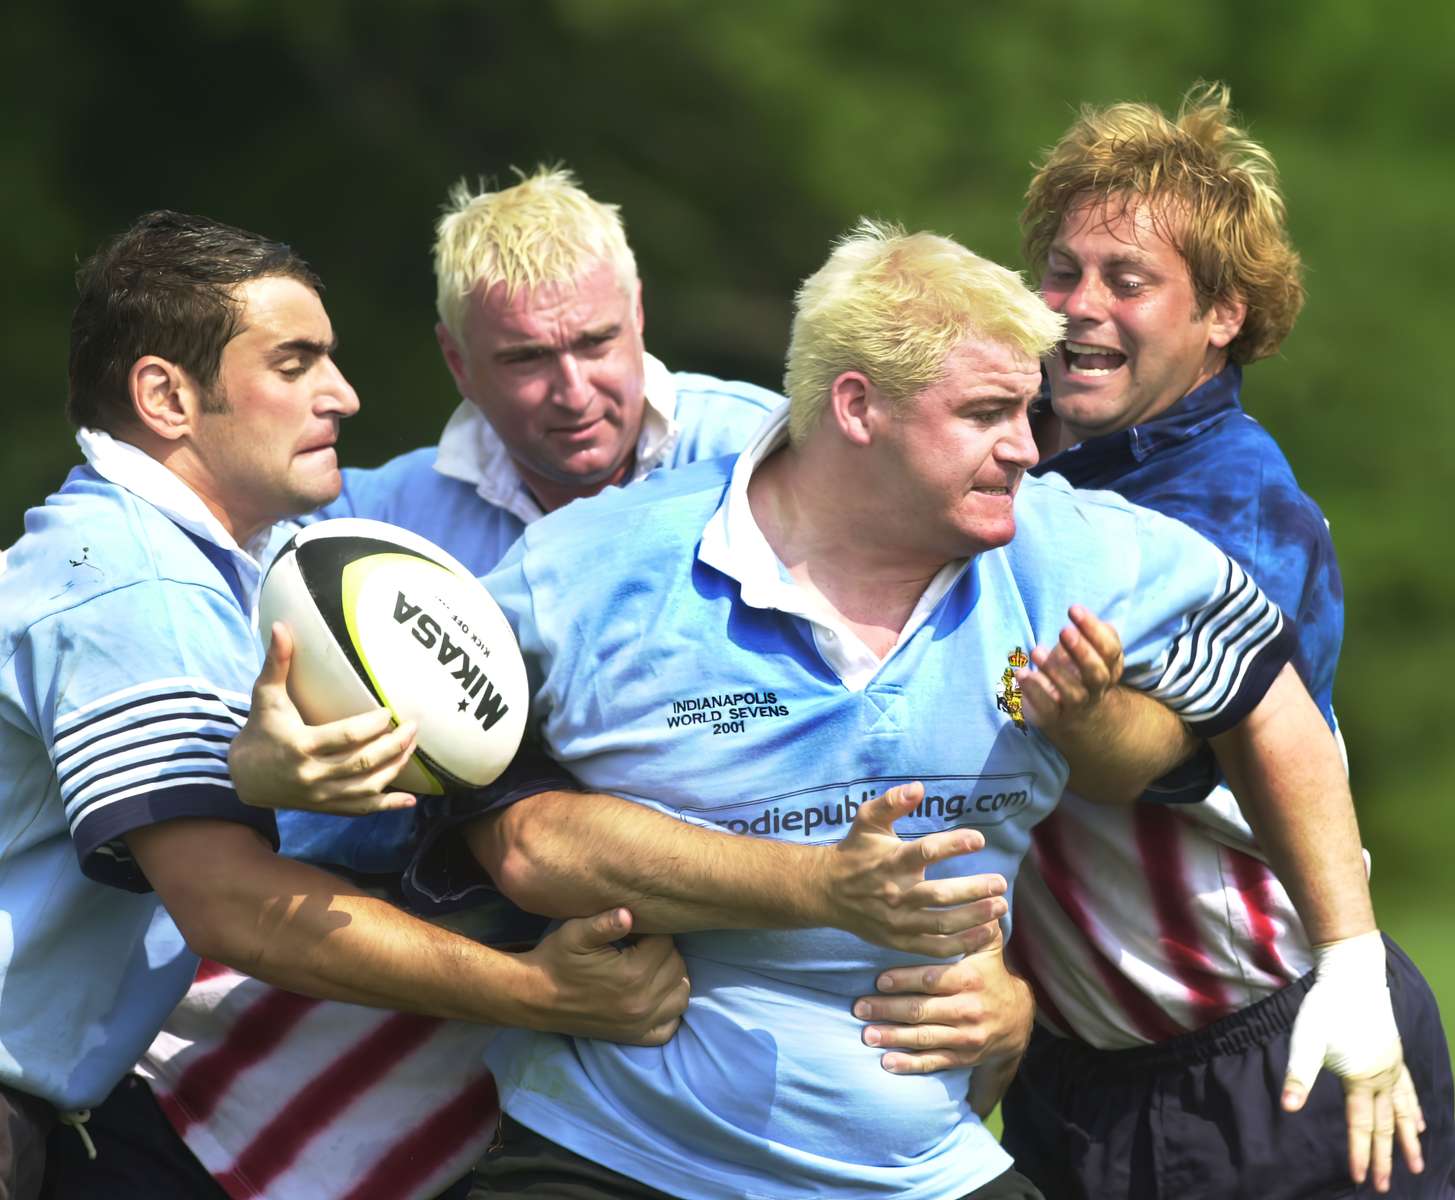 GENERAL INFORMATION: staff photo/Karen Ducey. #60062. 6/13/01IN THIS PHOTO: Matt Davies (center) from Rugby, England plays rugby against the New York City Fire department during the World Police and Fire Games.  He is a Prison Guard at Onley Prison in Great Britian.  {quote}The facilities are superb and the its all been organized excellent.{quote} he says of the games' experience.  {quote}Had a great night in Broad Ripple last night.  About the game he said {quote}Its been a bit tough... its too early in the morning.{quote}